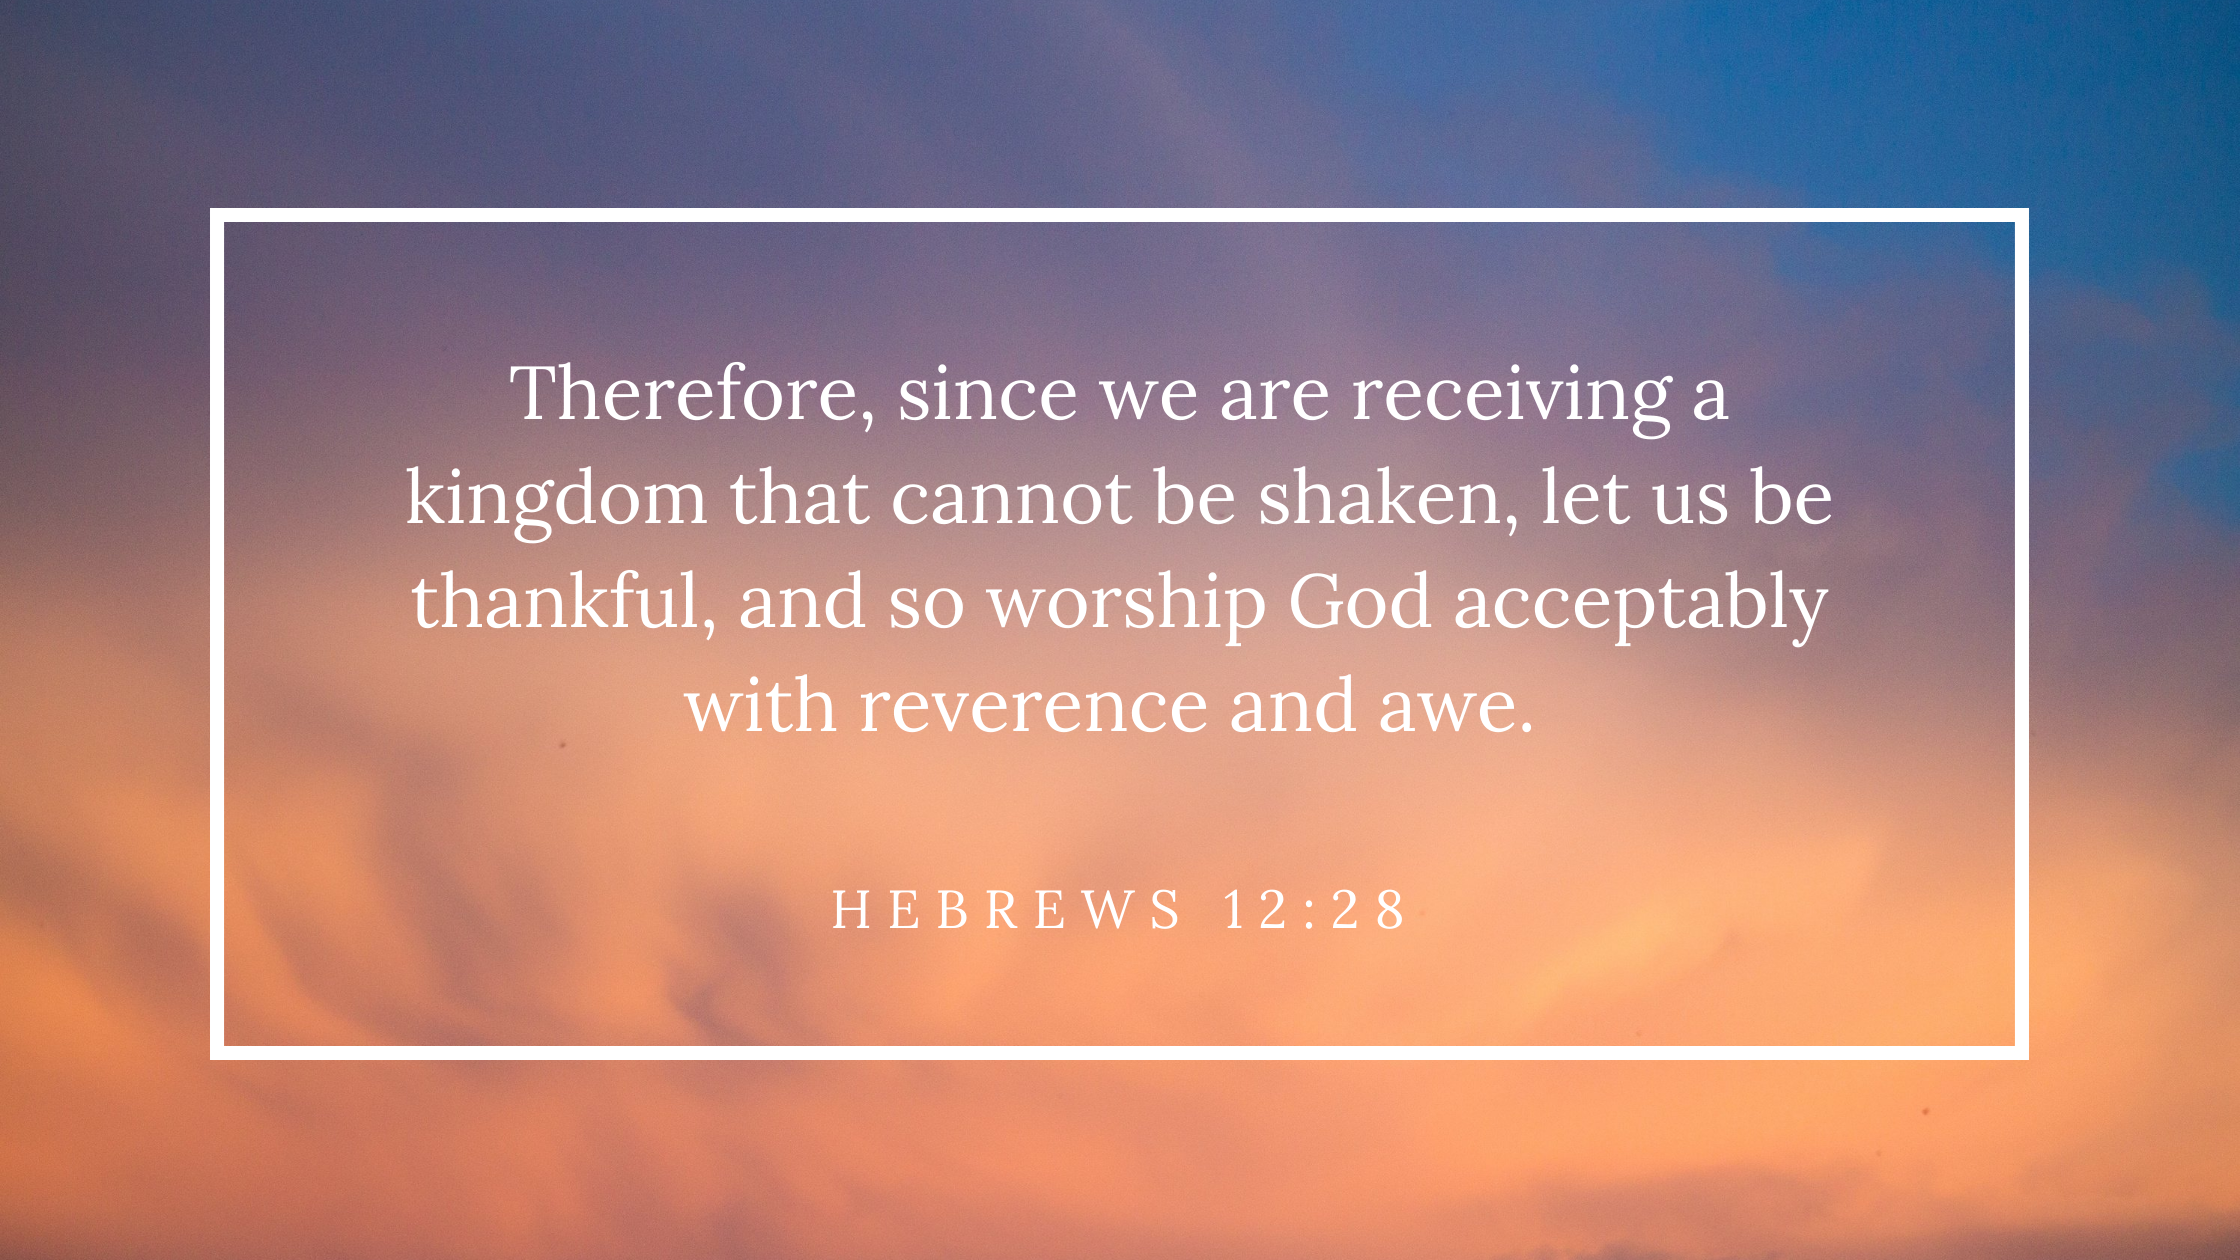 Therefore, since we are receiving a kingdom that cannot be shaken, let us be thankful, and so worship God acceptably with reverence and awe. -Heb. 12